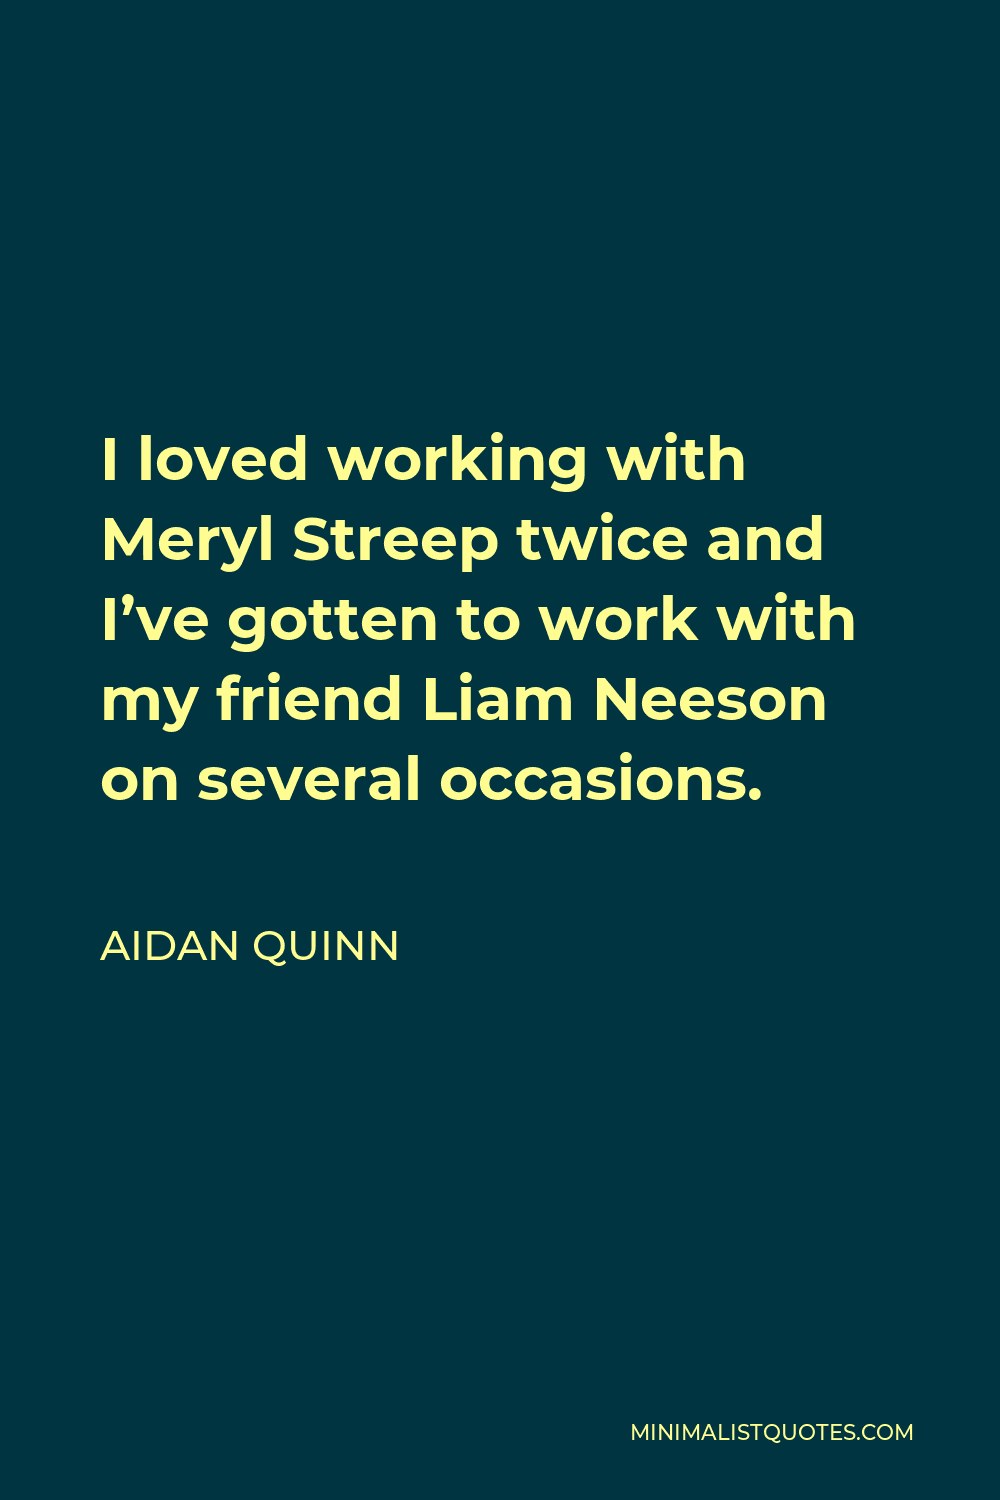 Aidan Quinn Quote - I loved working with Meryl Streep twice and I’ve gotten to work with my friend Liam Neeson on several occasions.